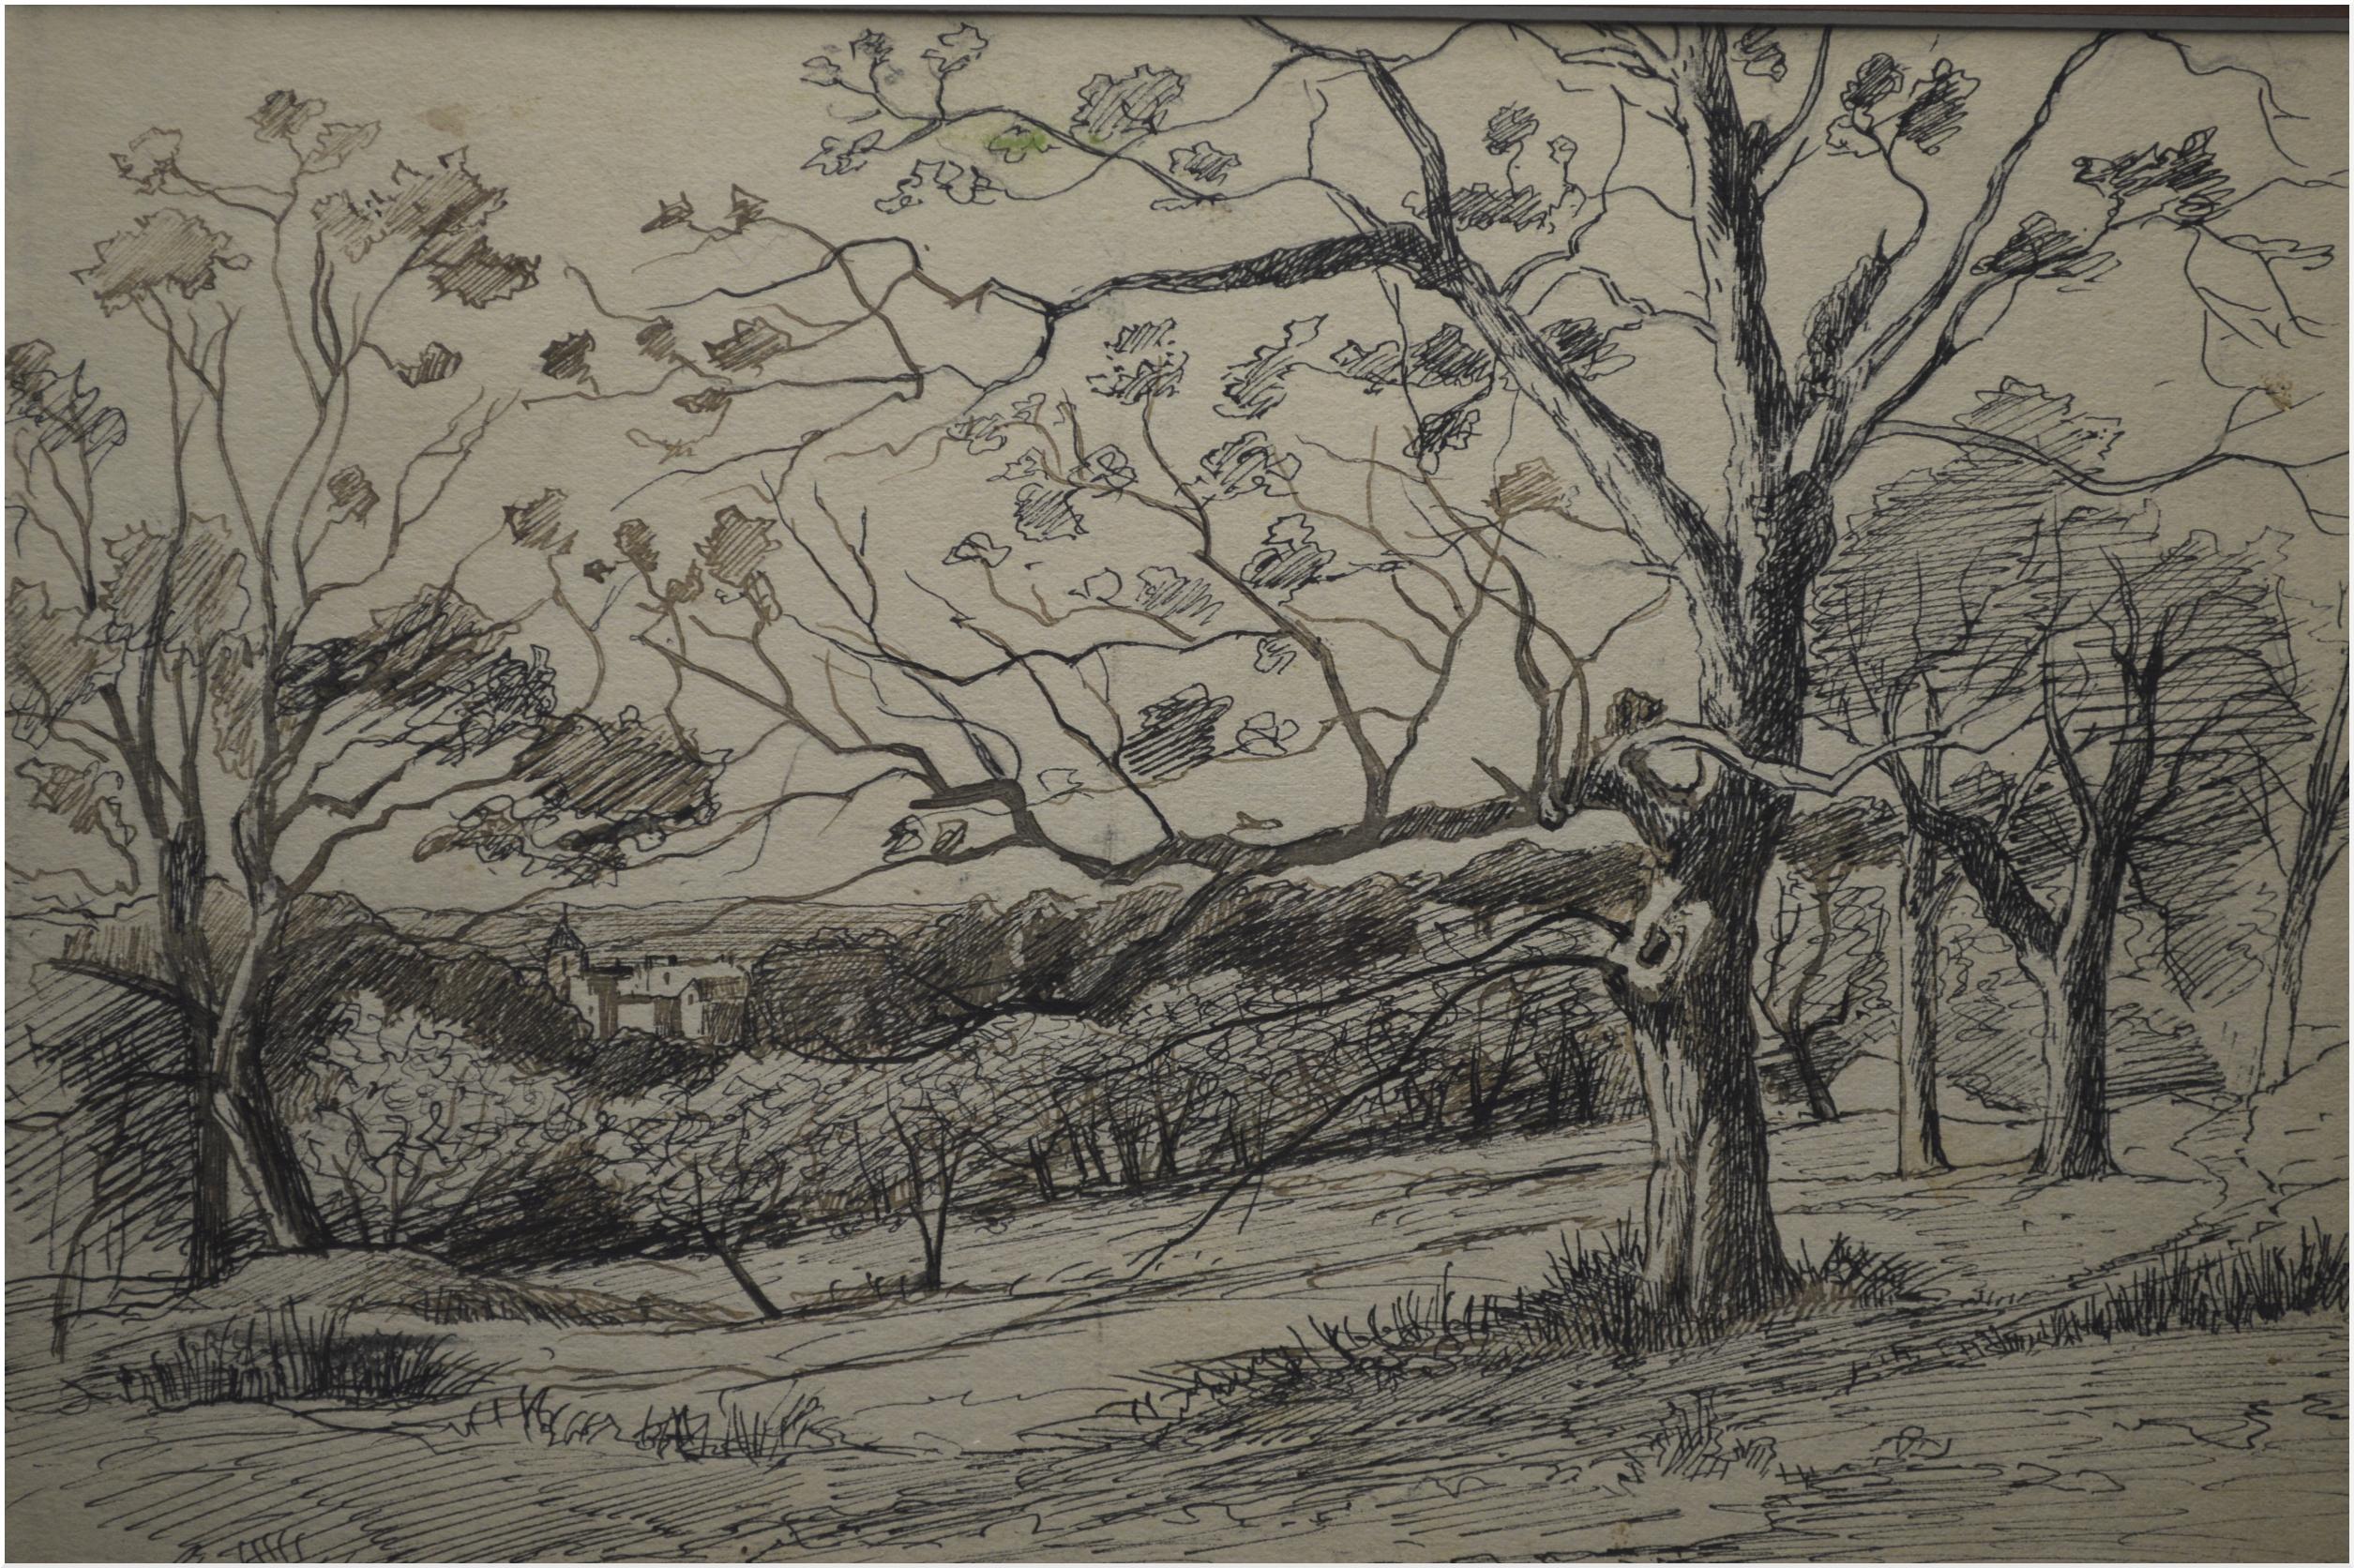 Wash and ink on paper representing a bucolic landscape by Alexis Eugène GUIGNE (1839-1920)

End of the 19th century - beginning of the 20th century

In the foreground, centuries-old trees in front of a forest, in the background, the village of